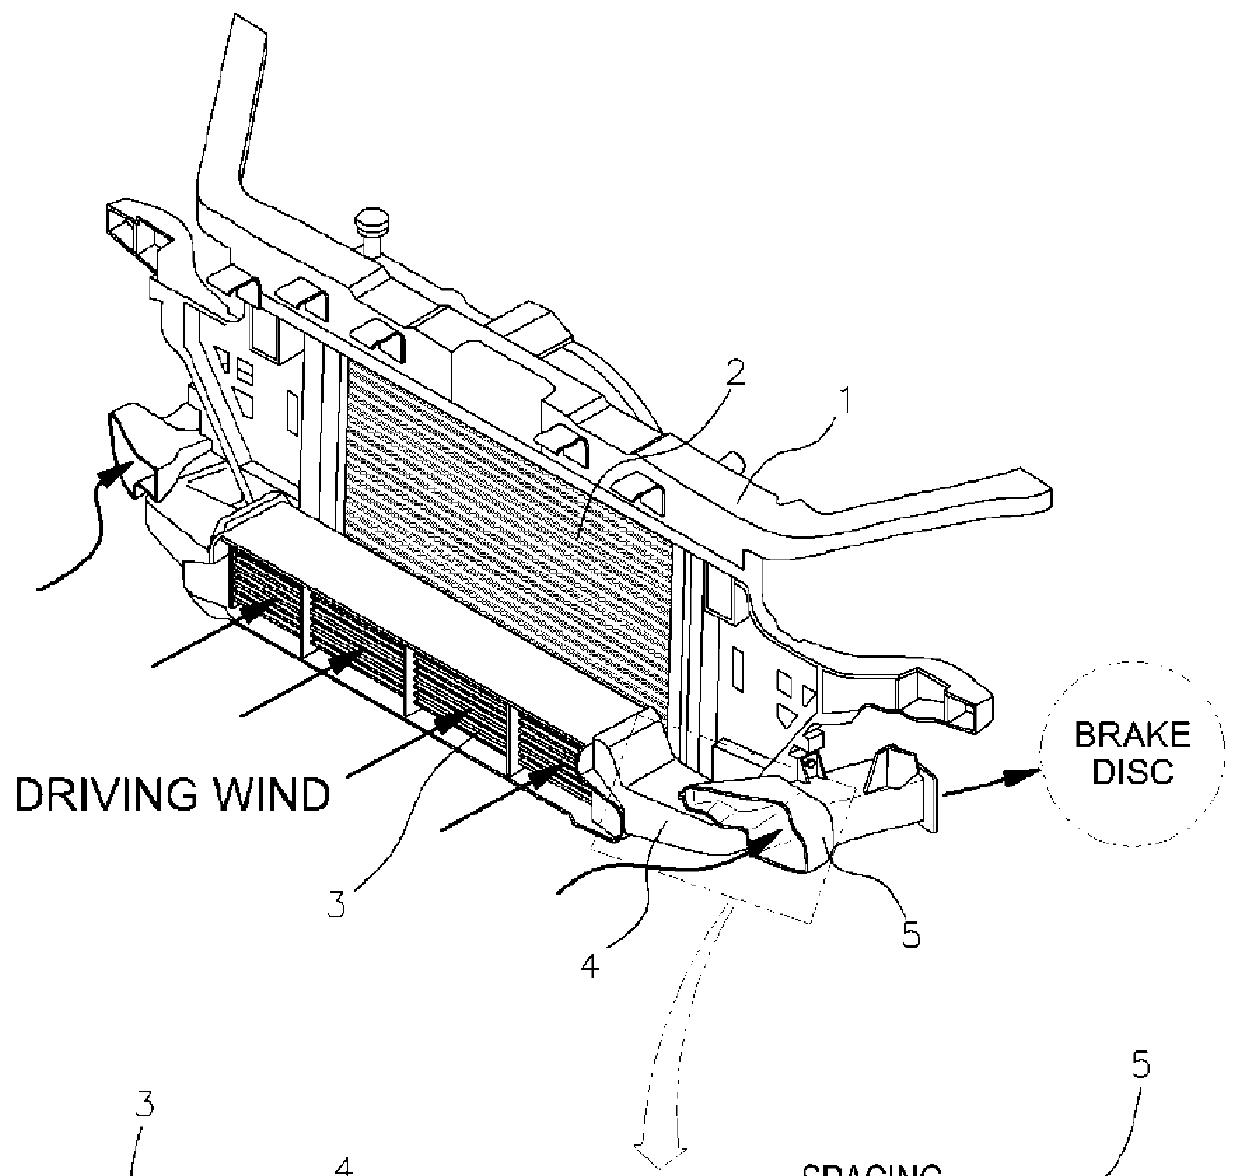 Structure of brake-cooling duct